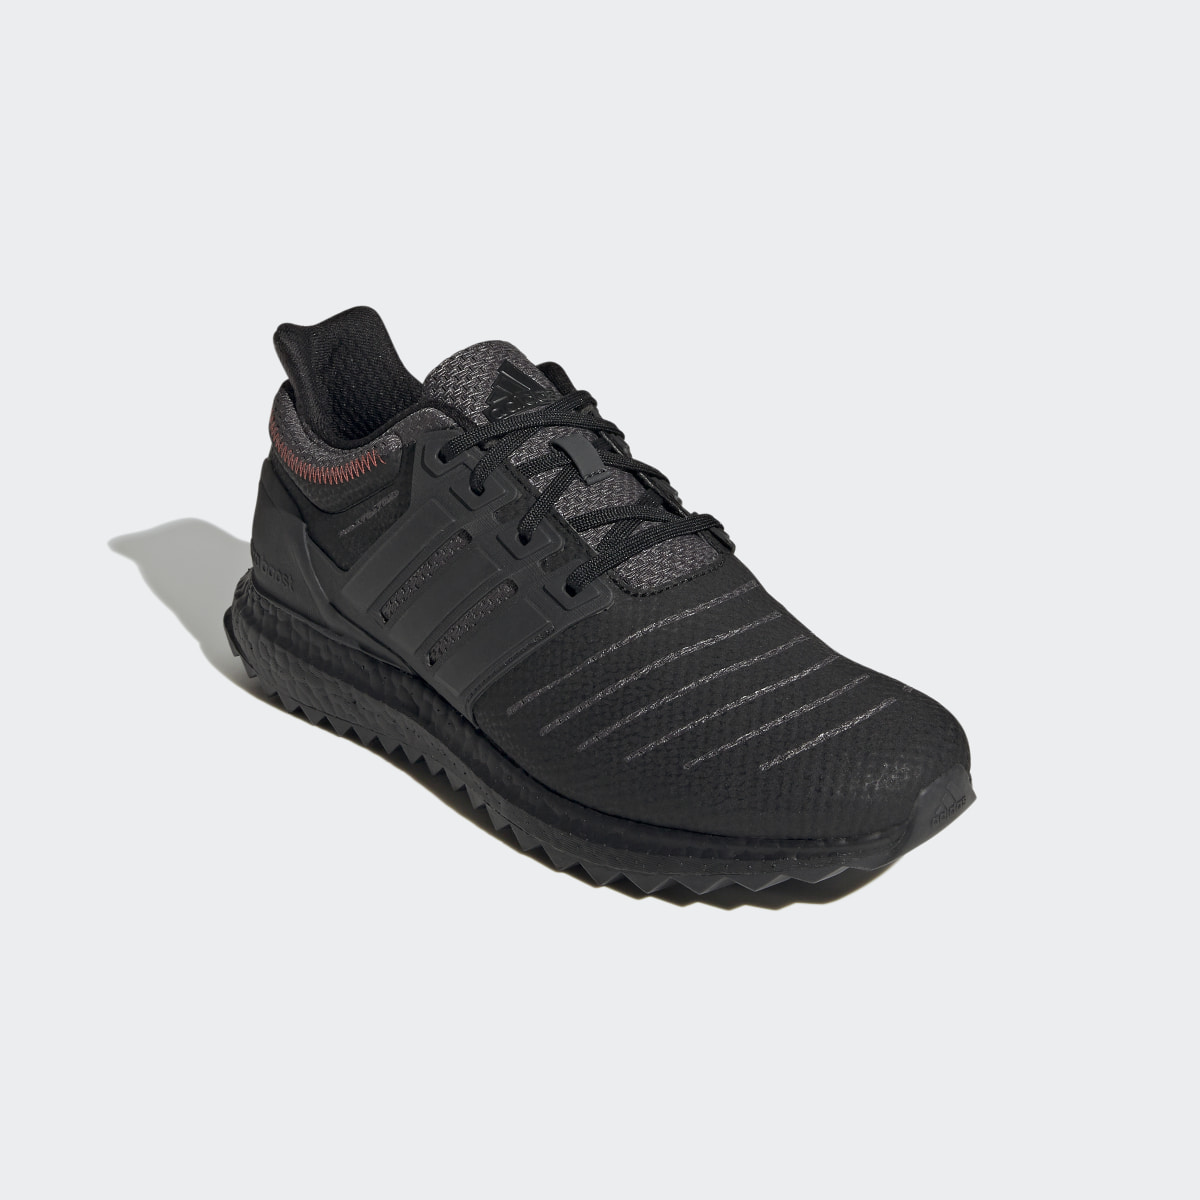 Adidas Ultraboost DNA XXII Lifestyle Running Sportswear Capsule Collection Shoes. 5